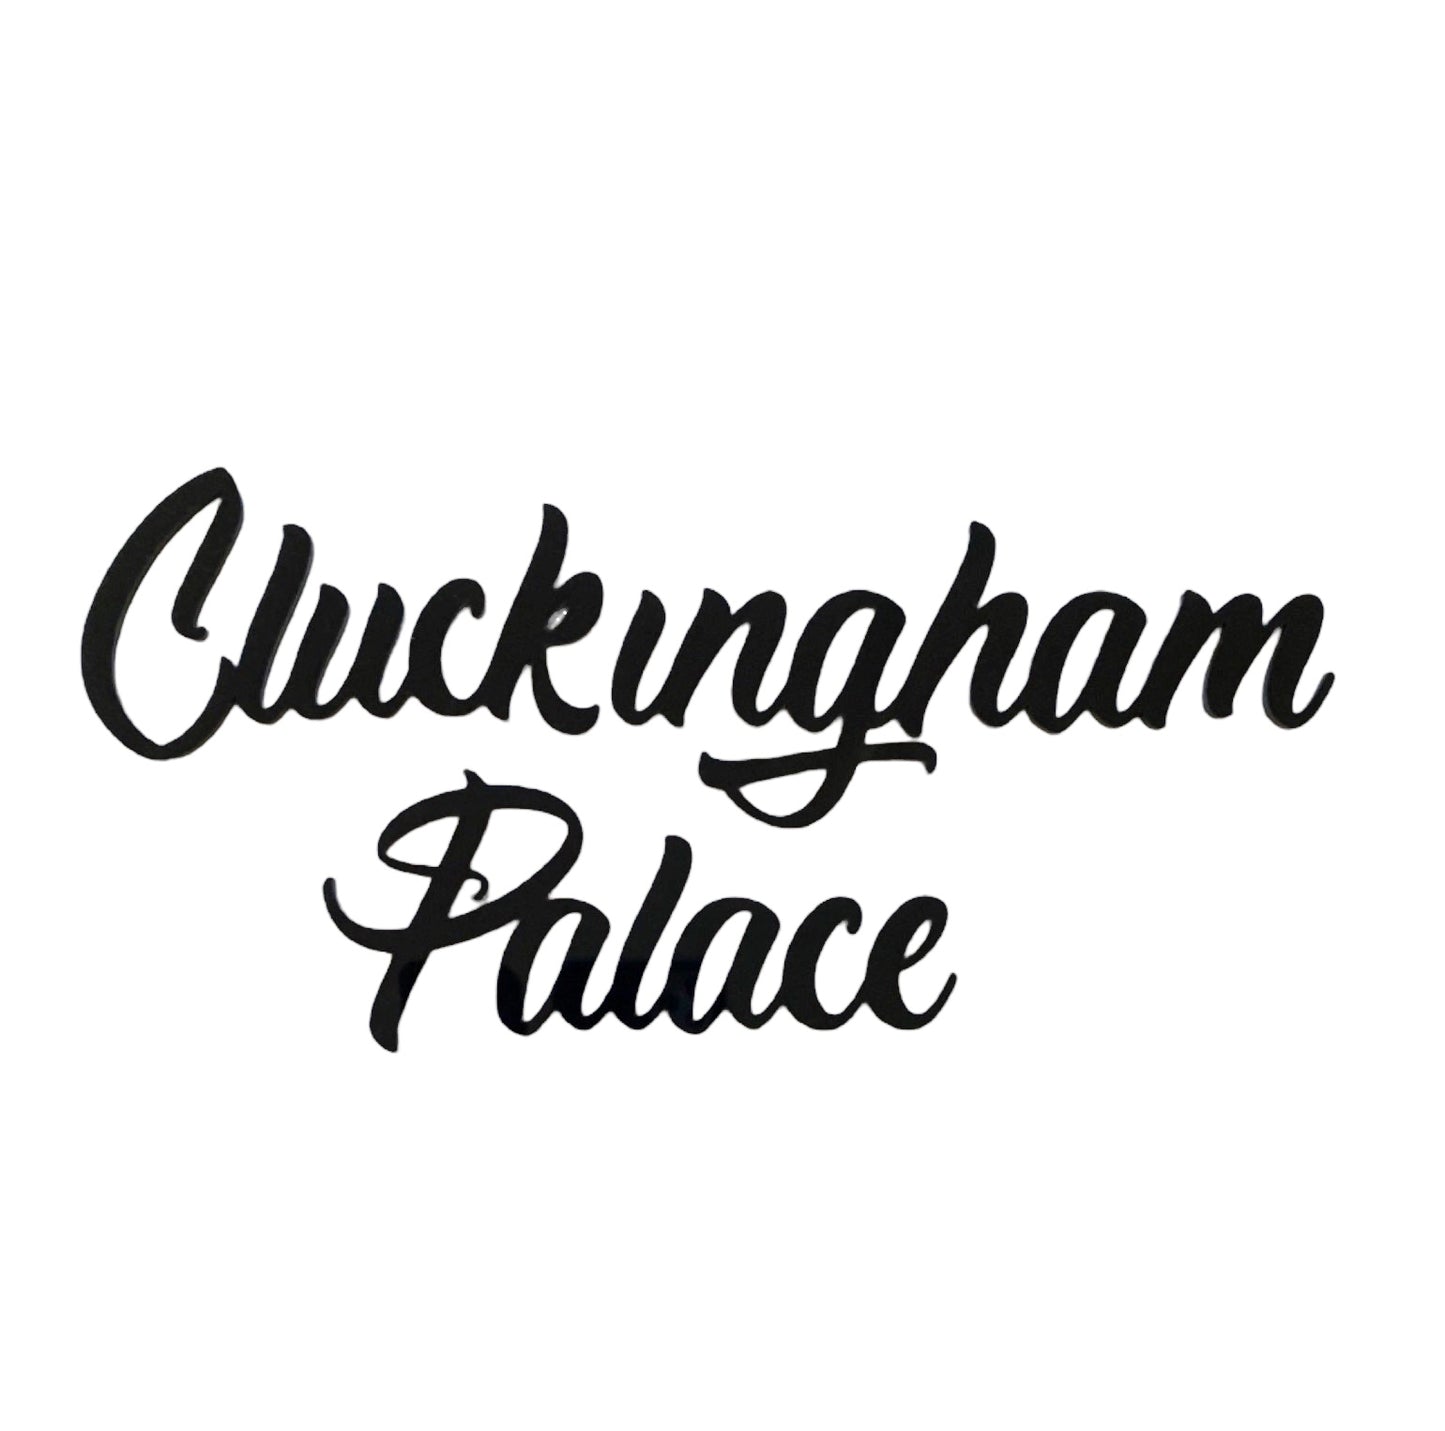 Cluckingham Palace Coop Chicken Sign - The Renmy Store Homewares & Gifts 